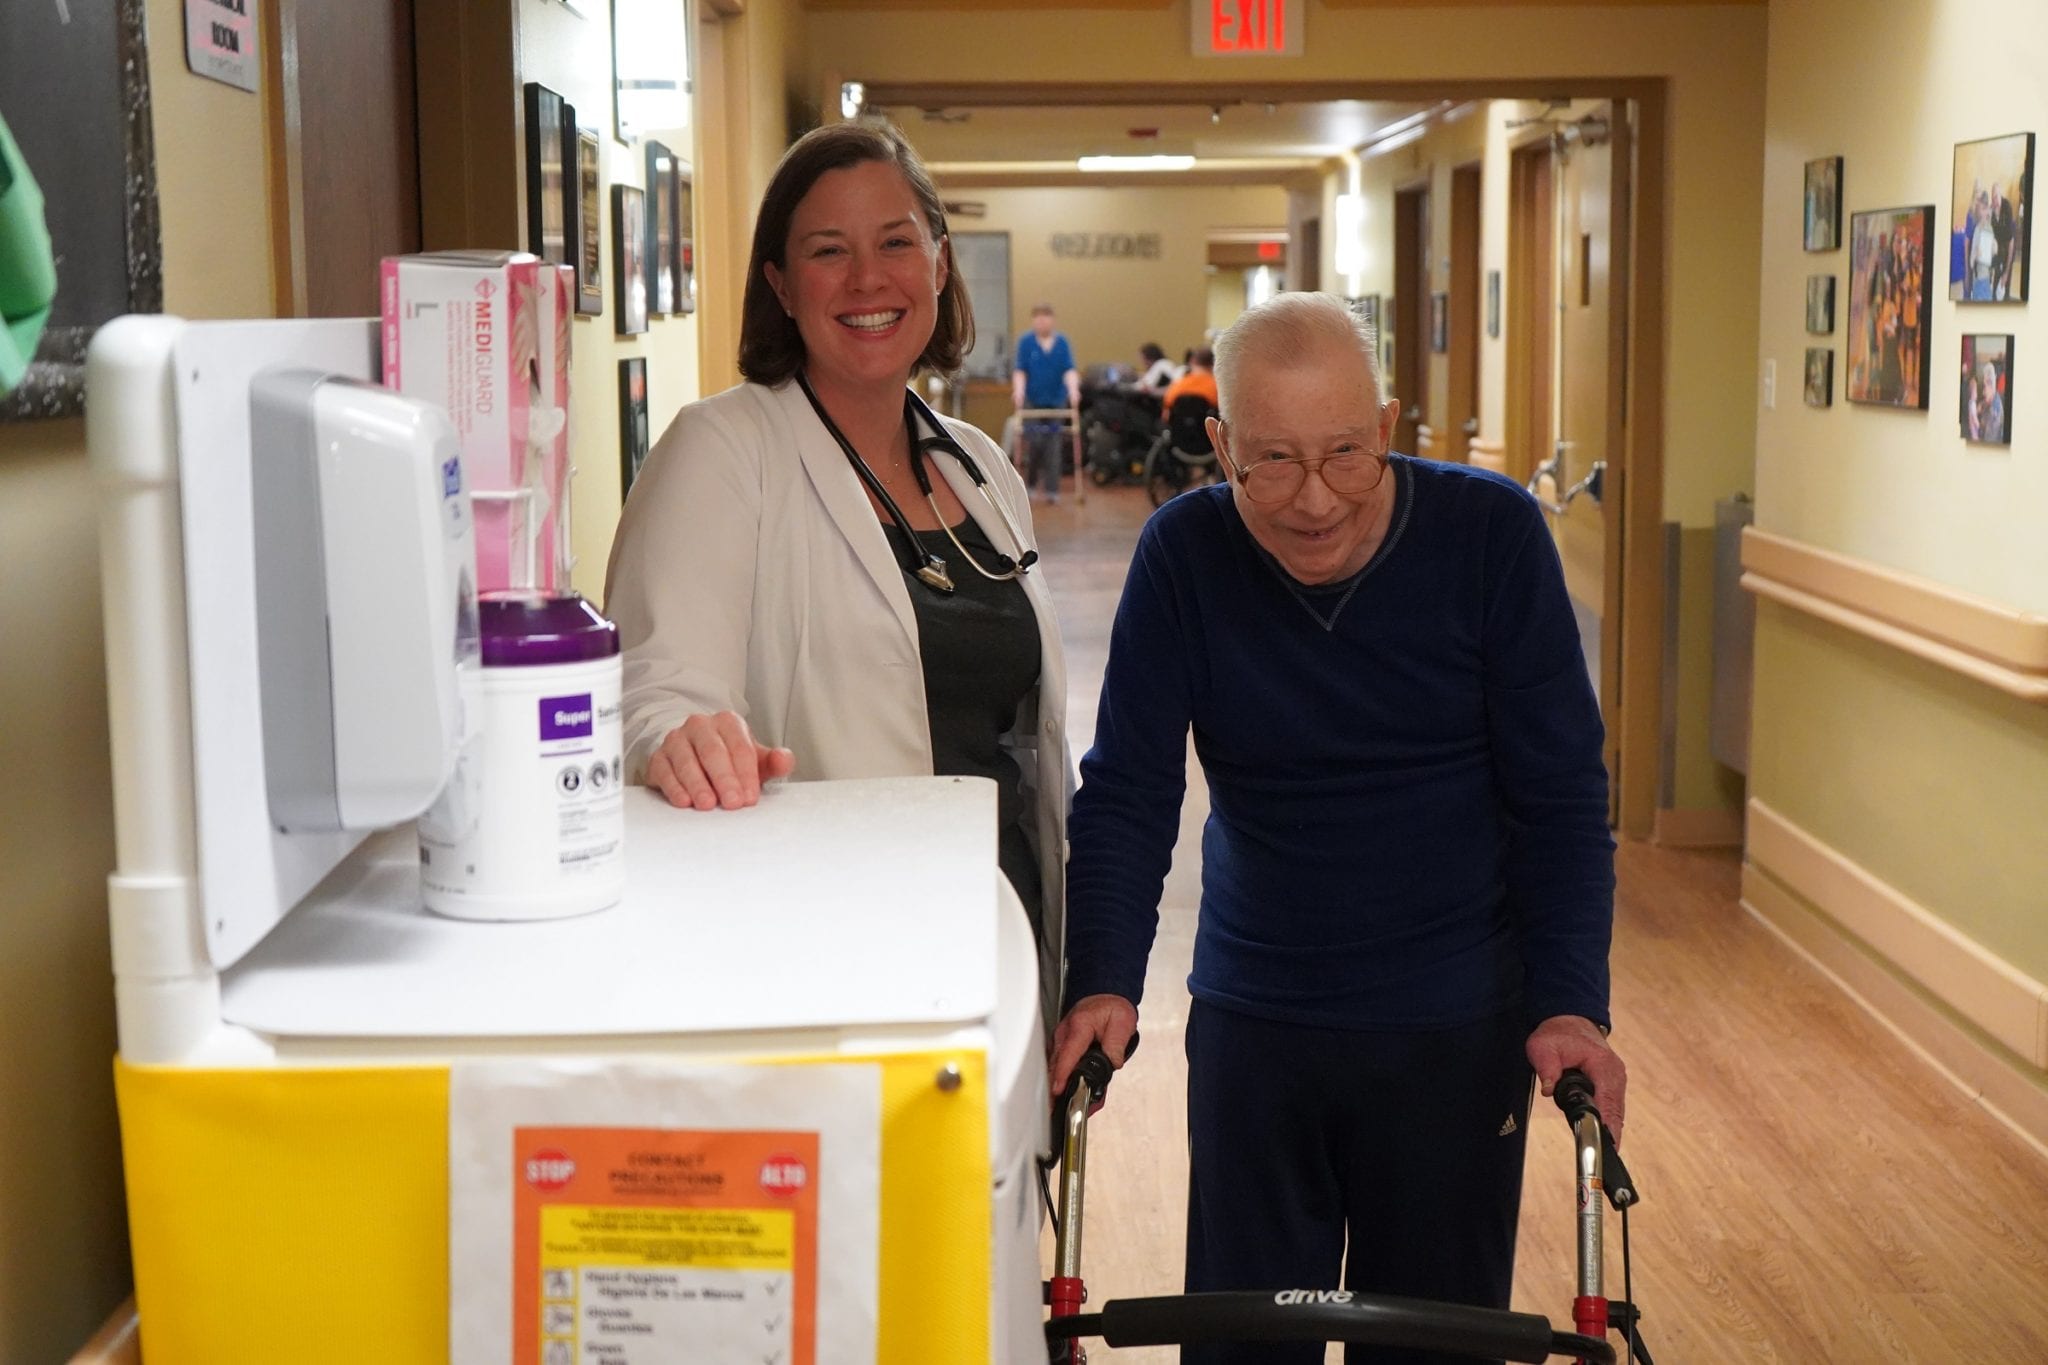 A mature male resident smiles and stands next to a smiling female healthcare worker in a corridor.